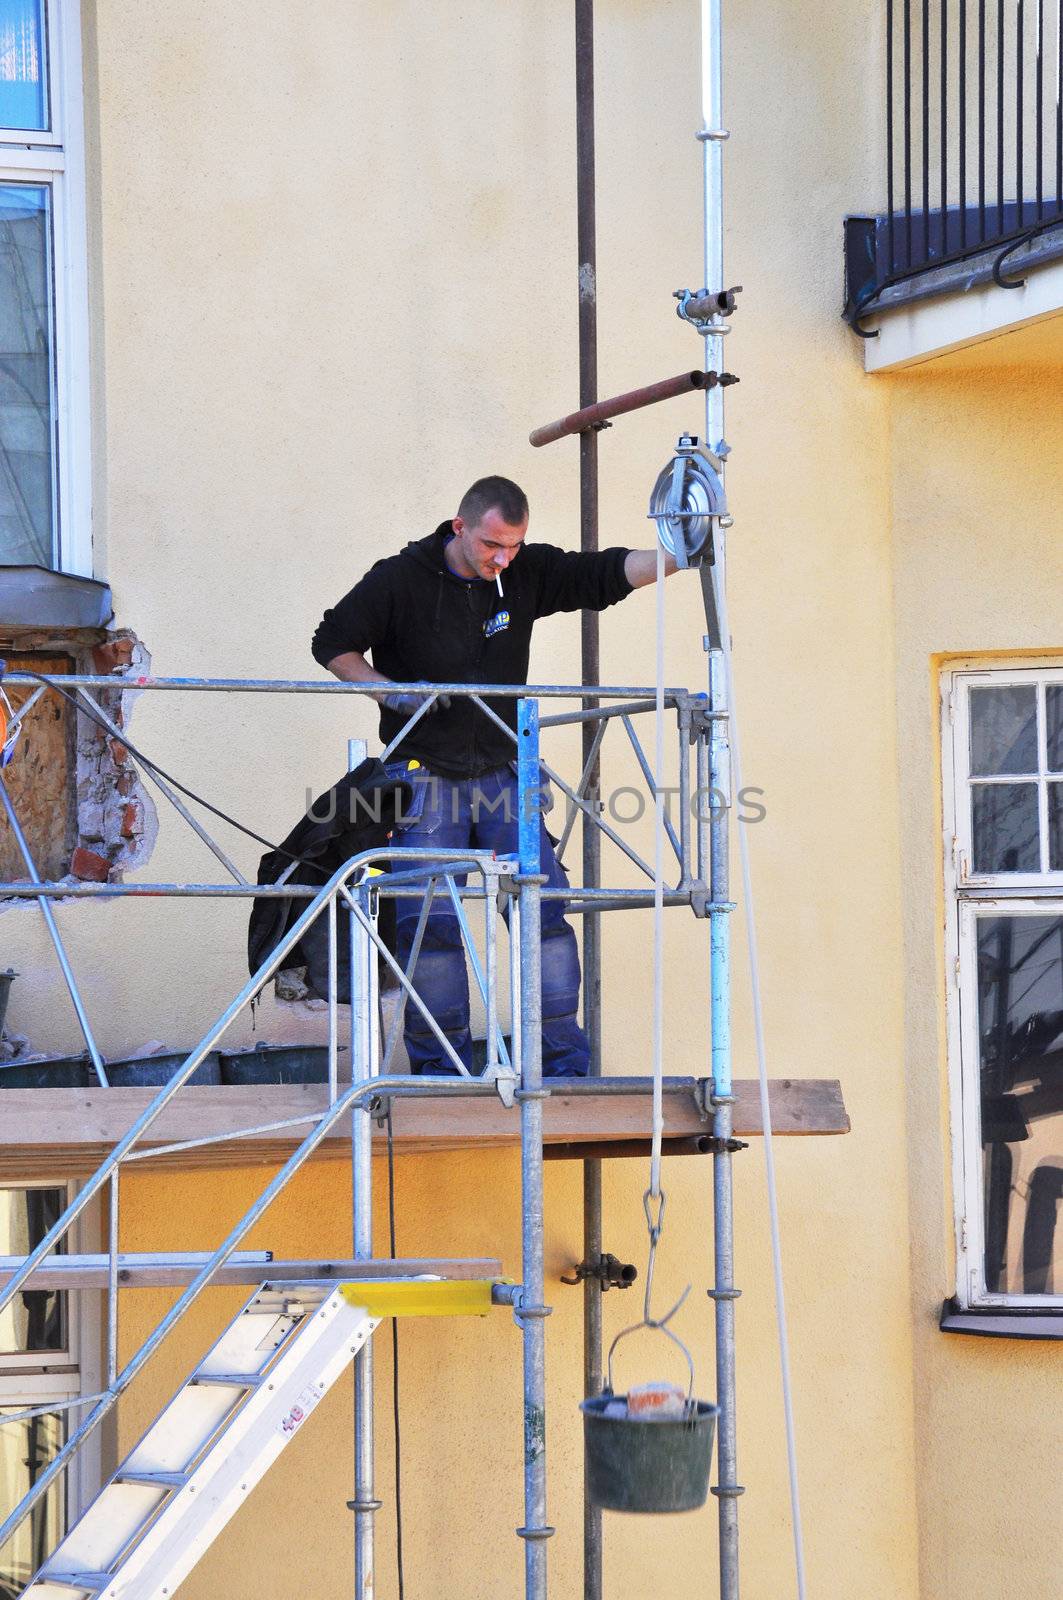 Balcony builder lowering a bucket with bricks to the ground in Stockholm, Sweden. Photo taken september 28 2011